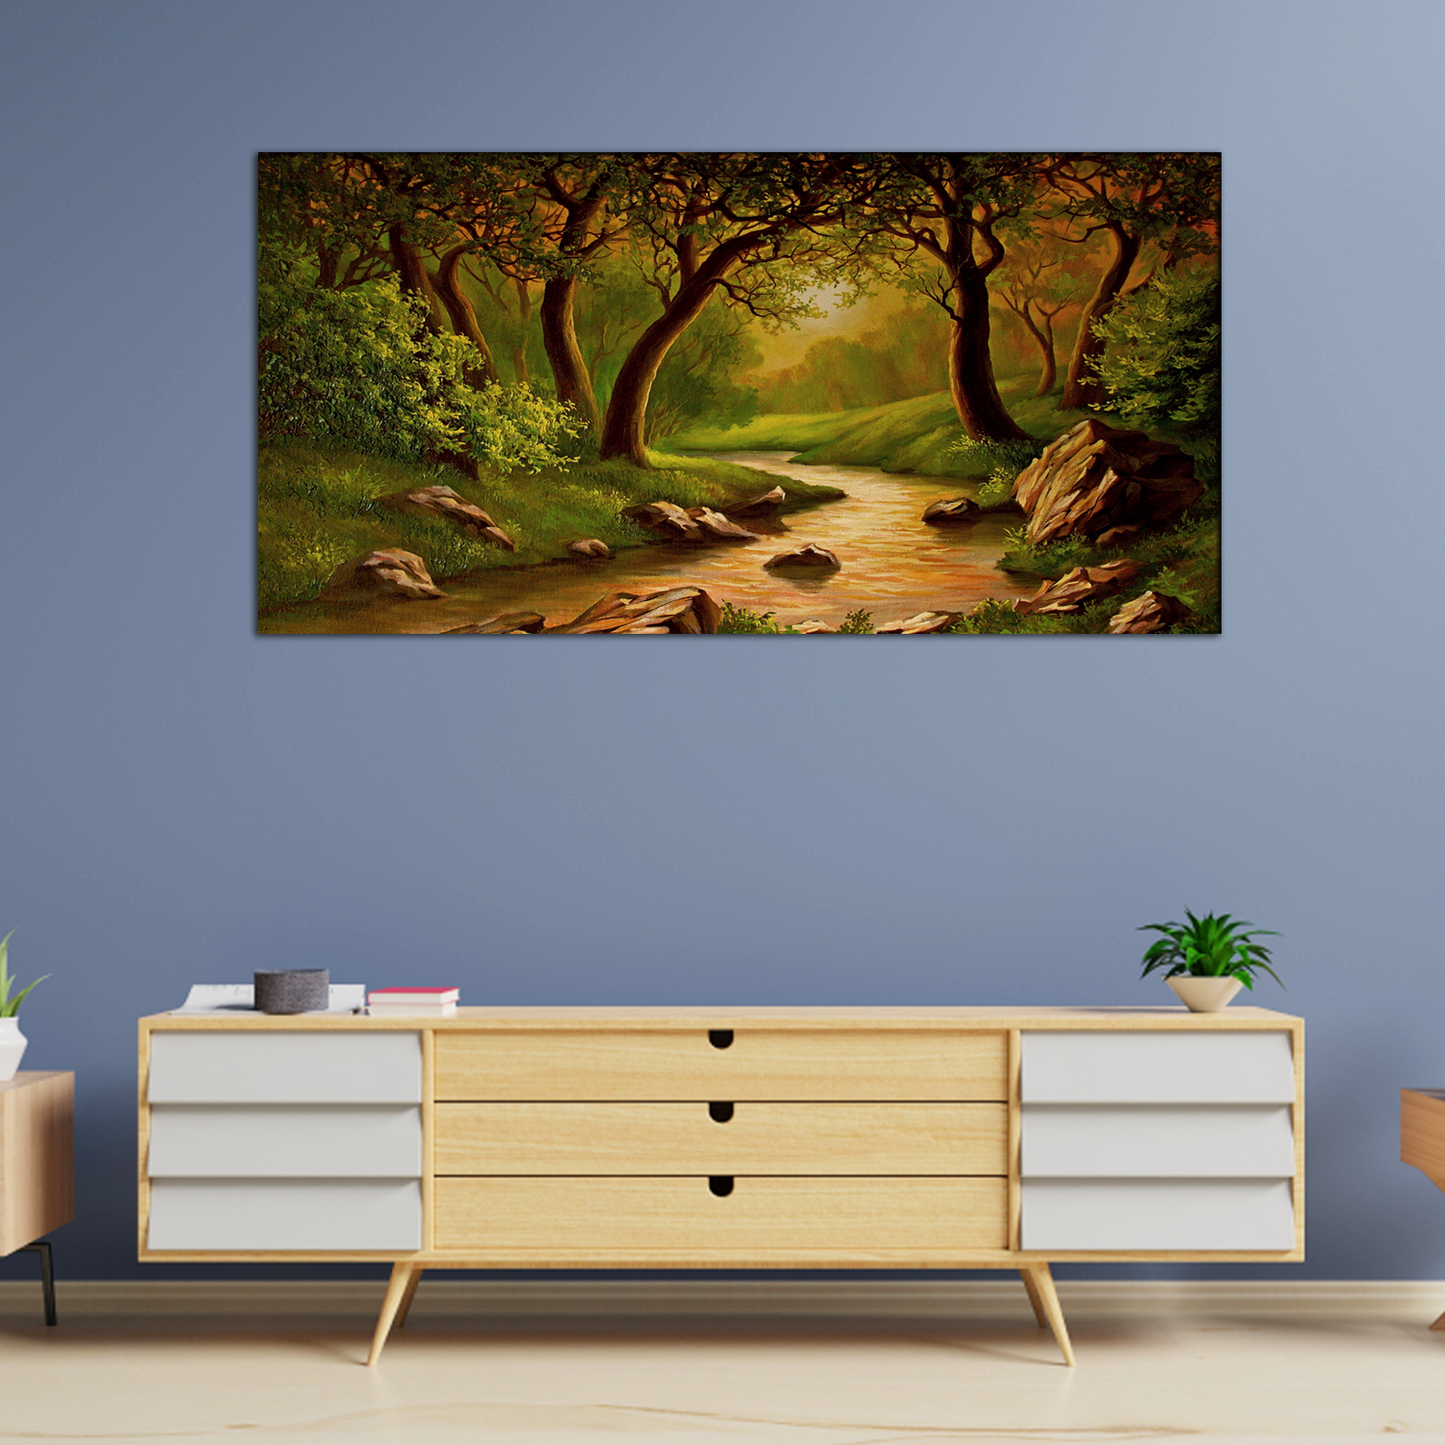 Autumn Forest With River Canvas Print Wall Painting